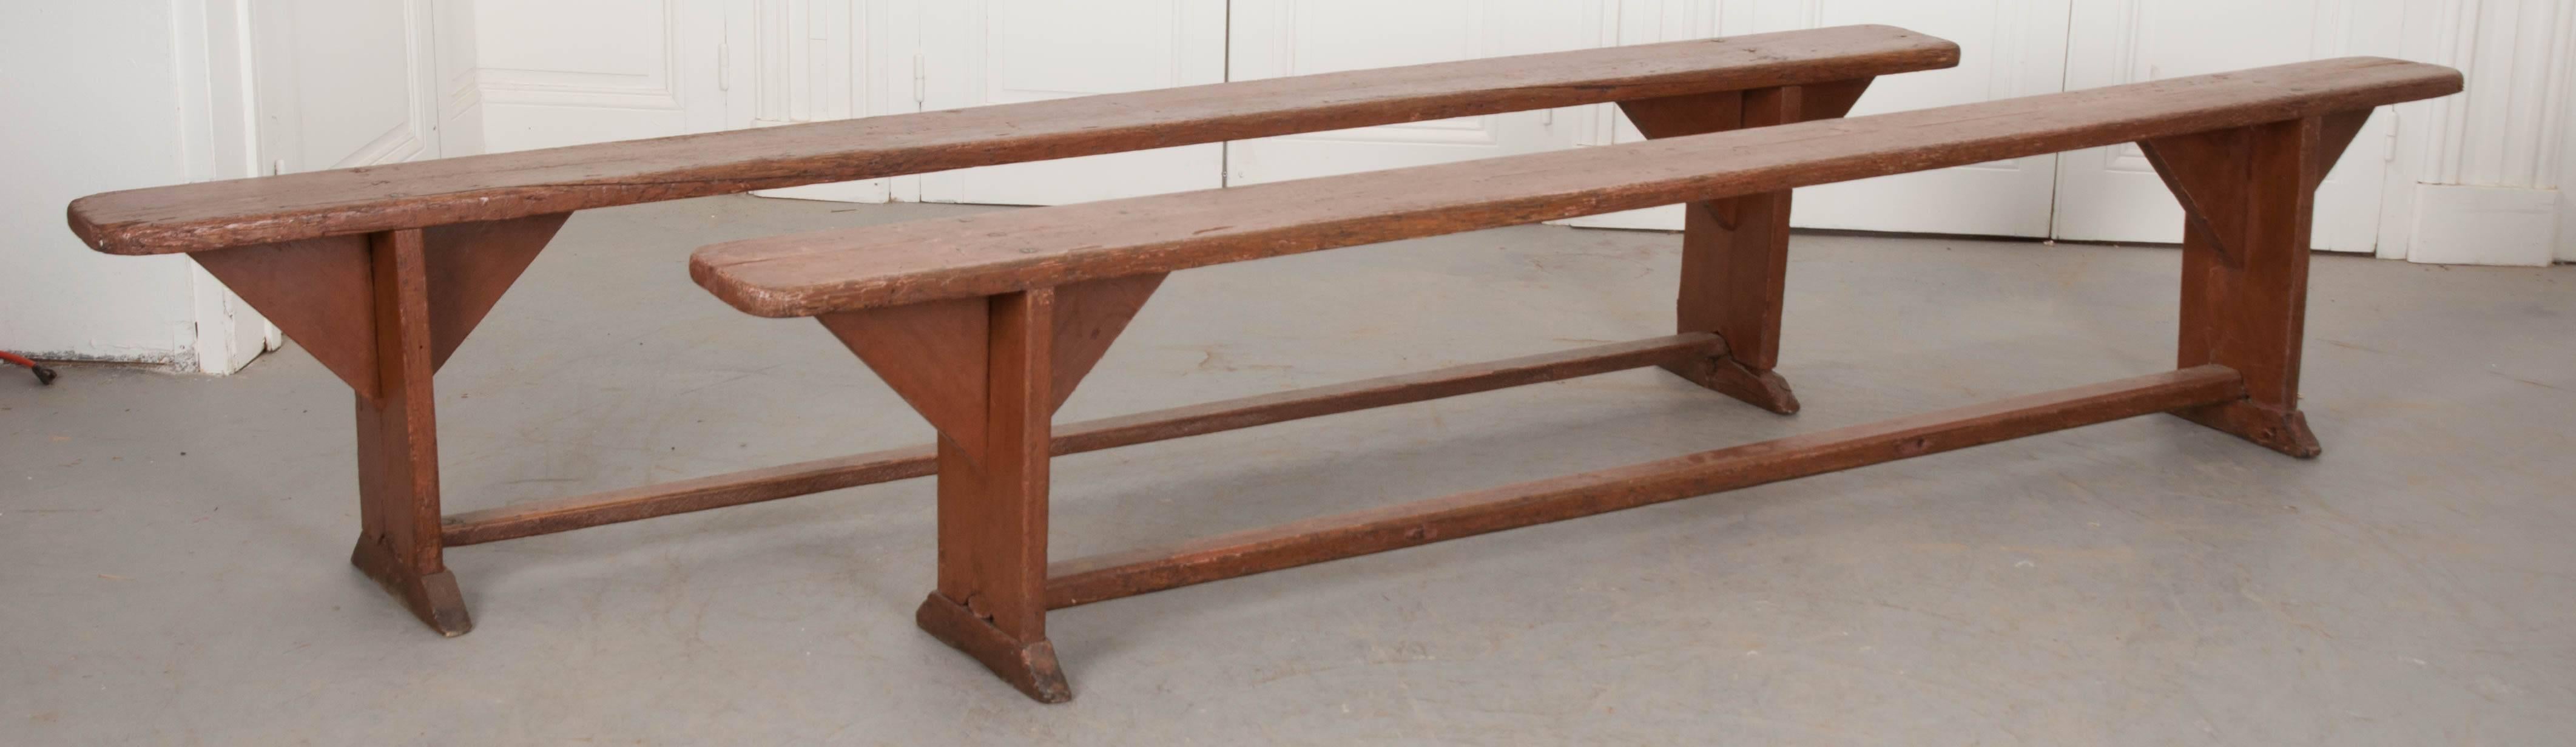 A handsome pair of pine benches from 19th century England. These wonderful benches have exceptional patina, with evidence of much use through the years. The pair could be used in lieu of dining chairs for one or both sides of a dining table. They